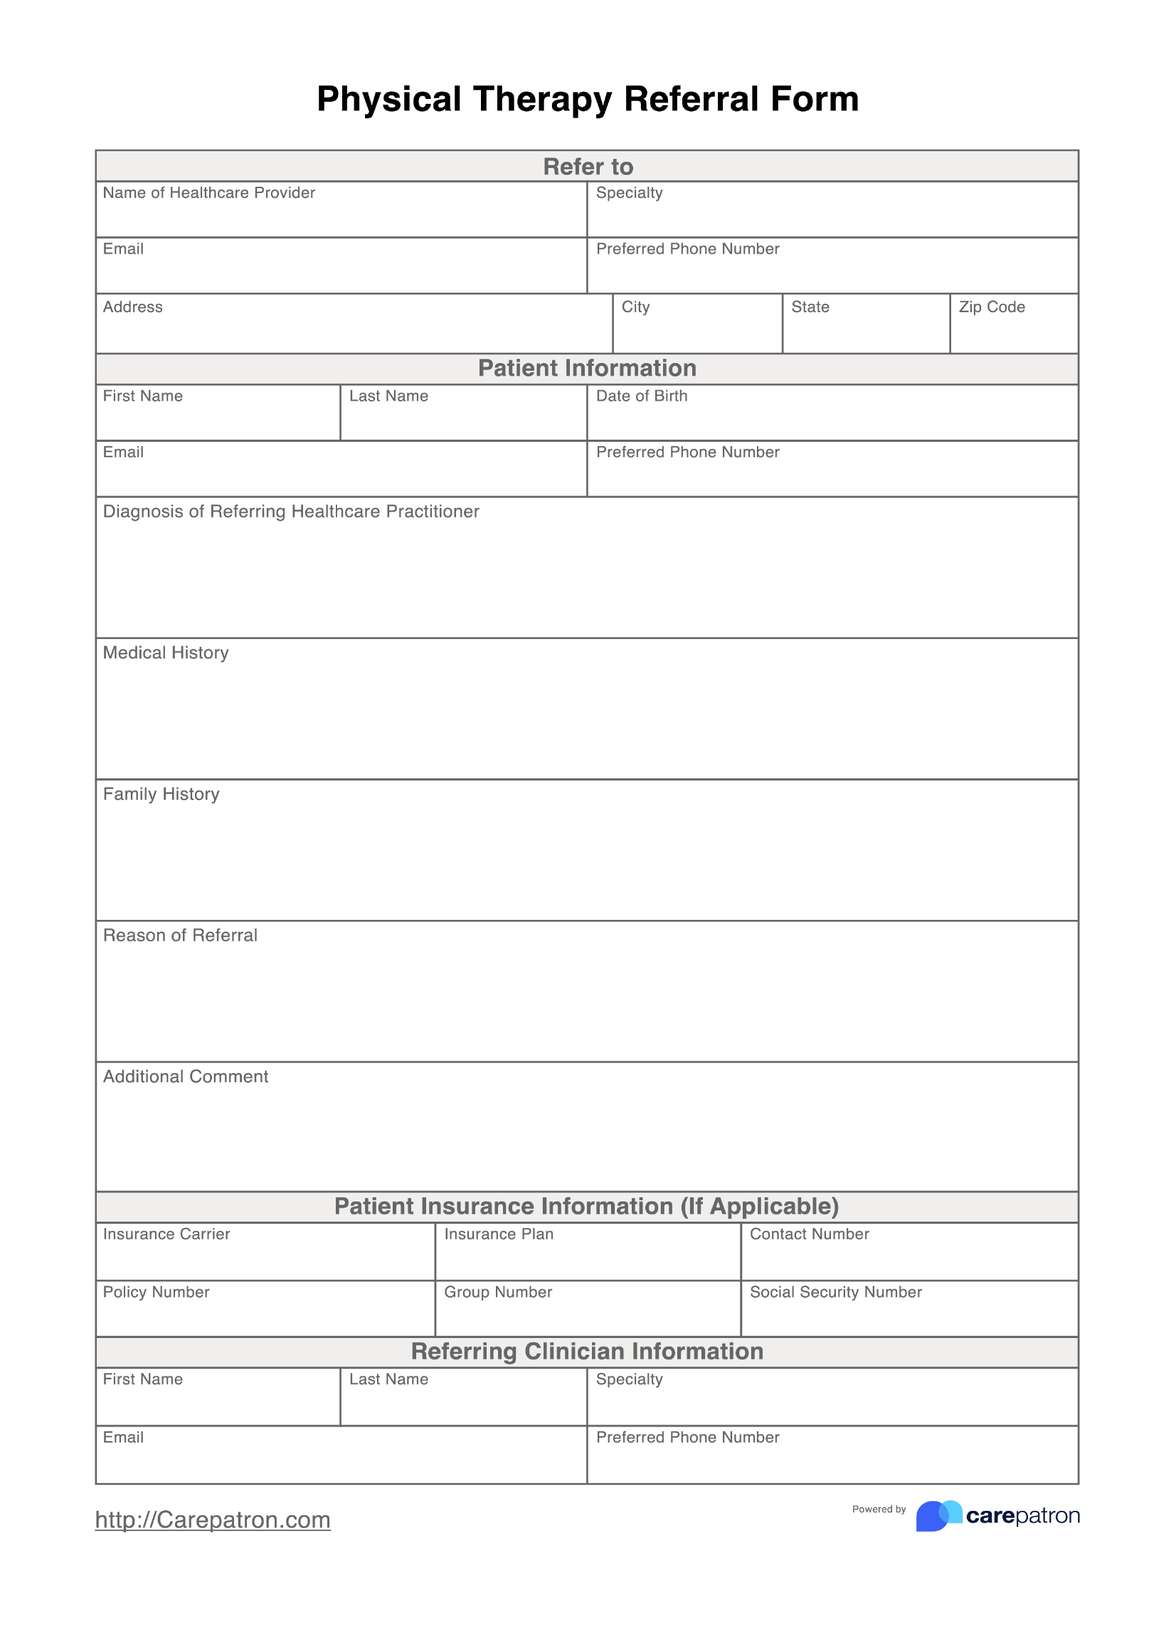 Physical Therapy Referral Form PDF Example